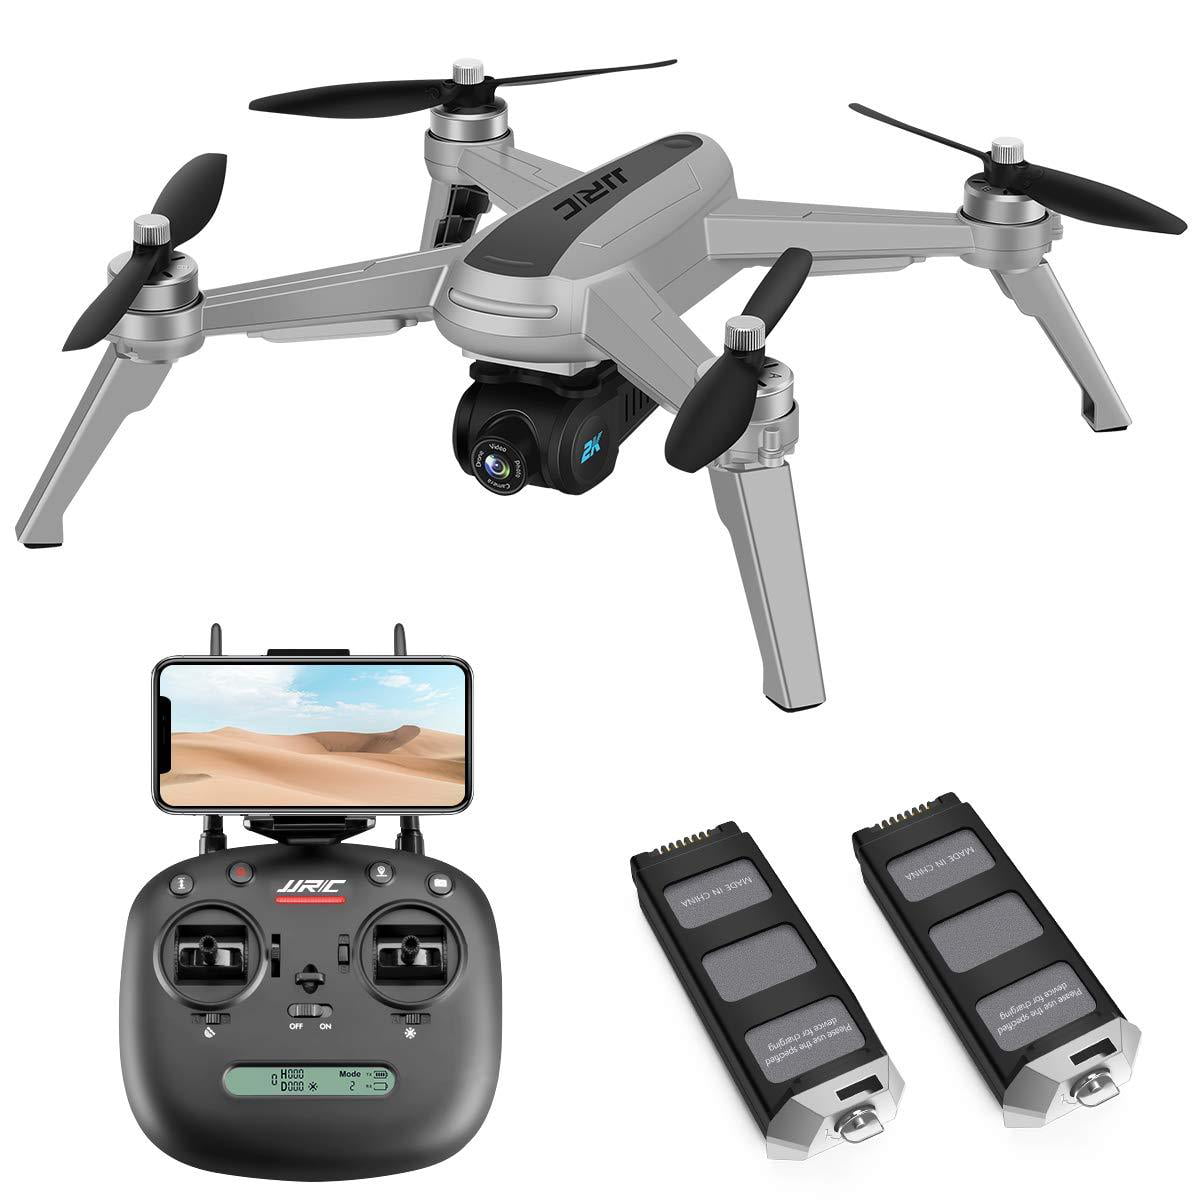 Details about   Streaming Drone High Definition Video 200ft Range Altitude Hold 6 Axis Gyro 